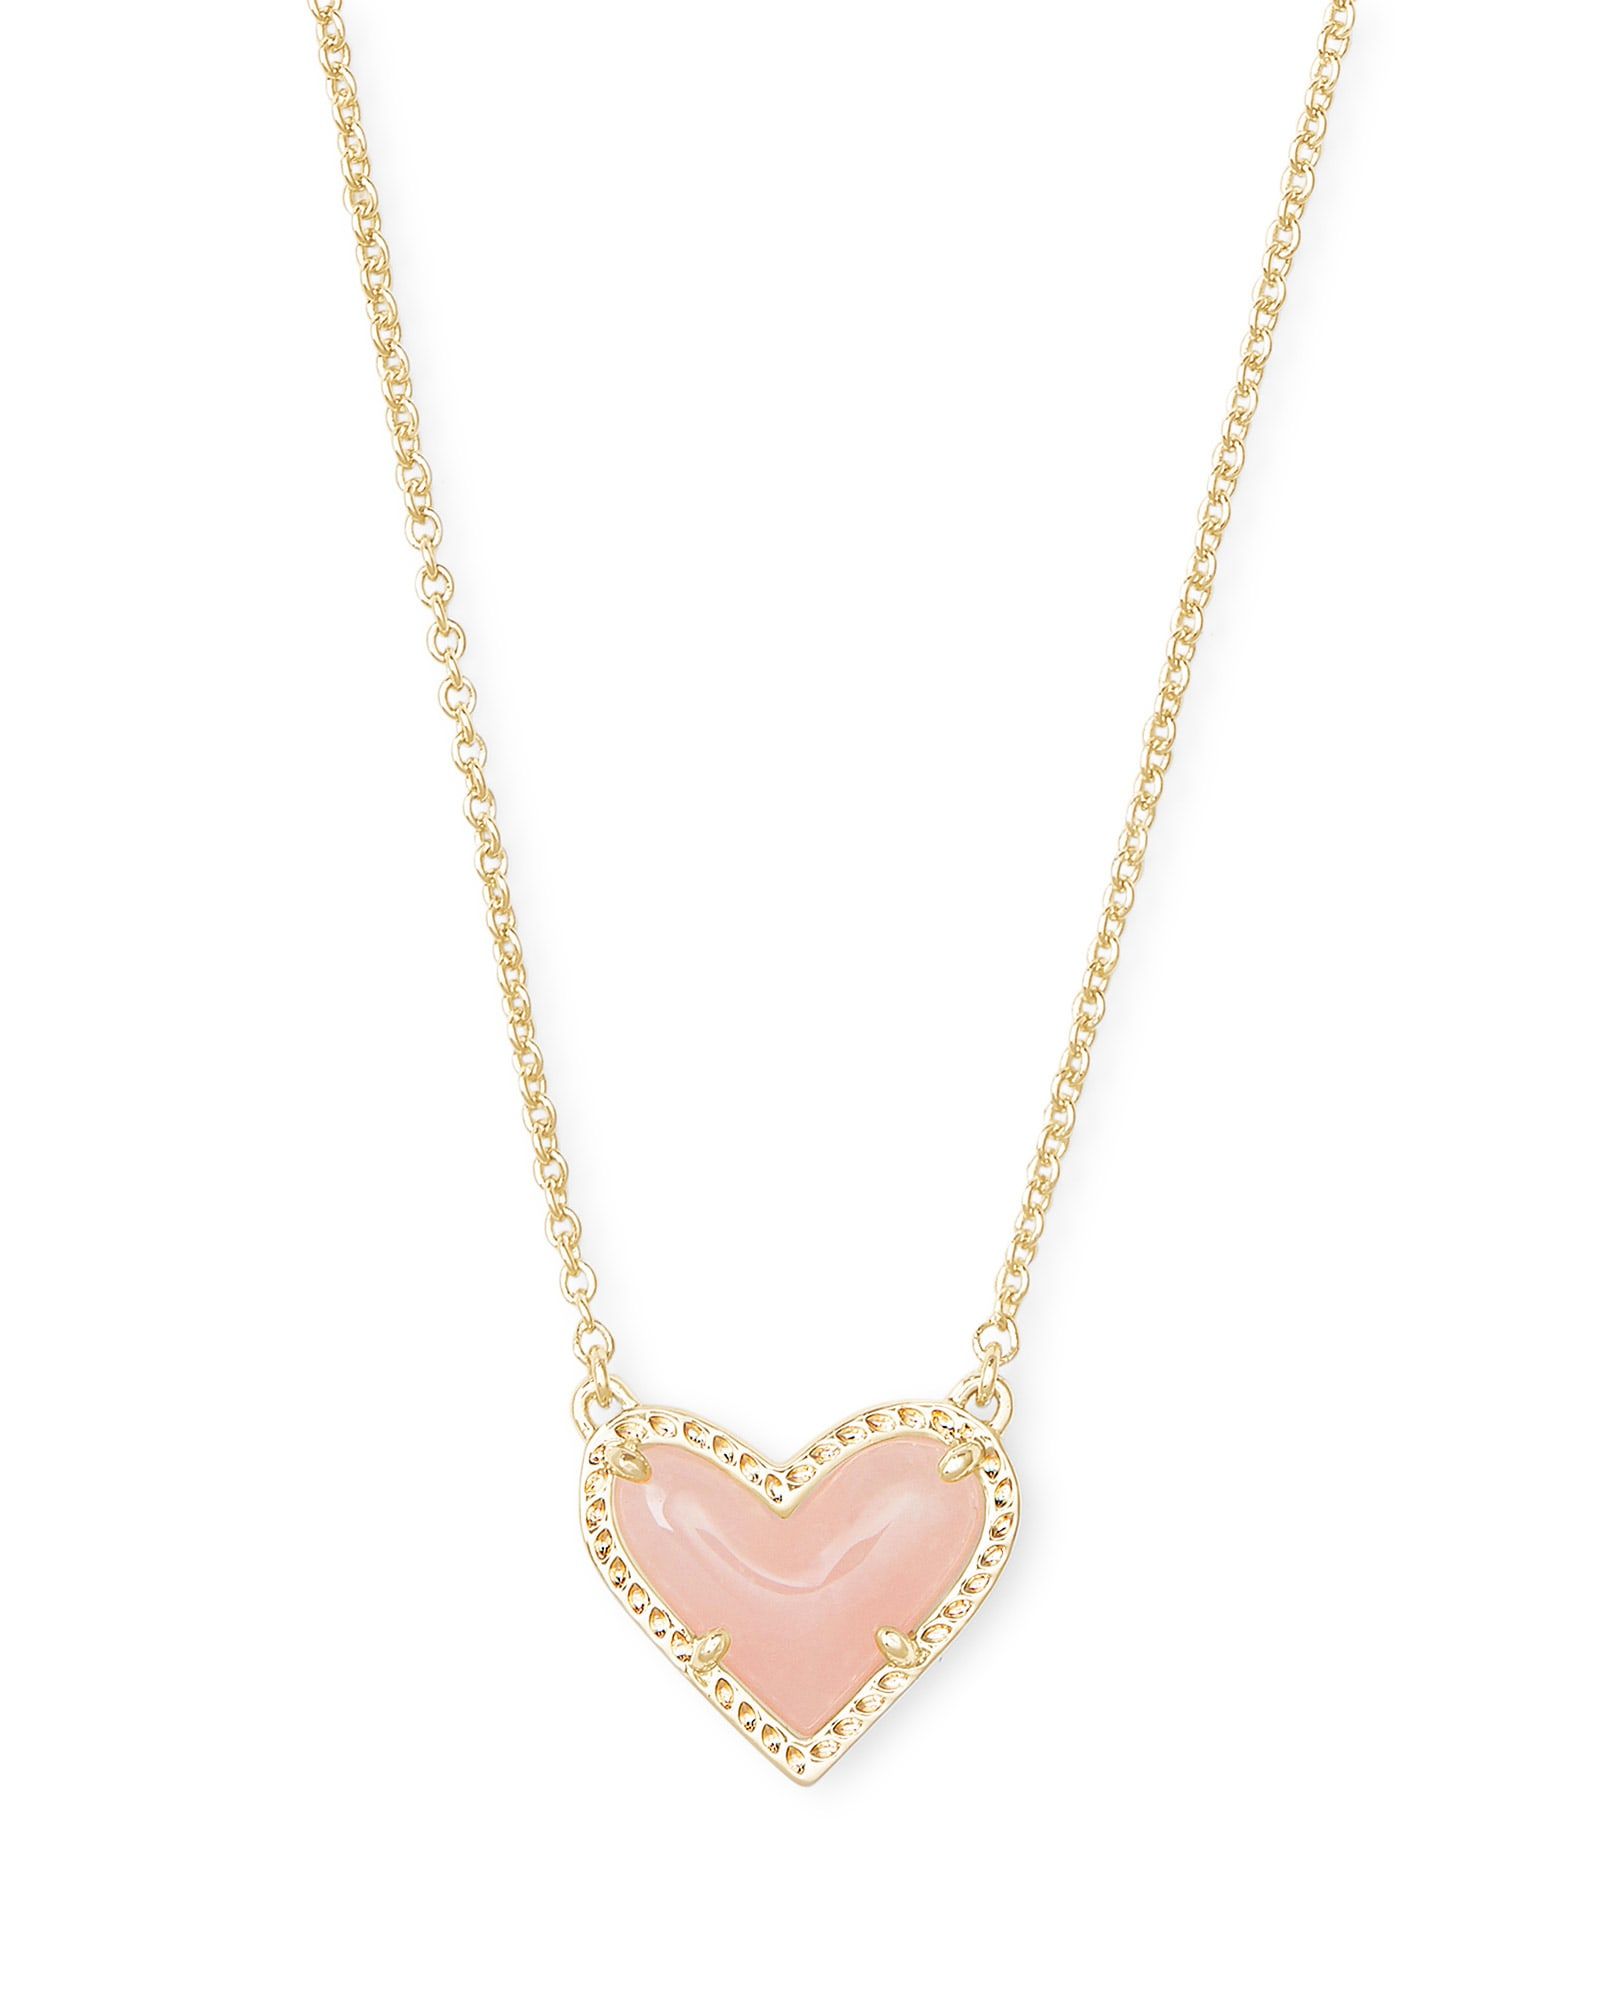 Cailin Gold Pendant Necklace in Champagne Opal Crystal | Kendra Scott | Kendra Scott